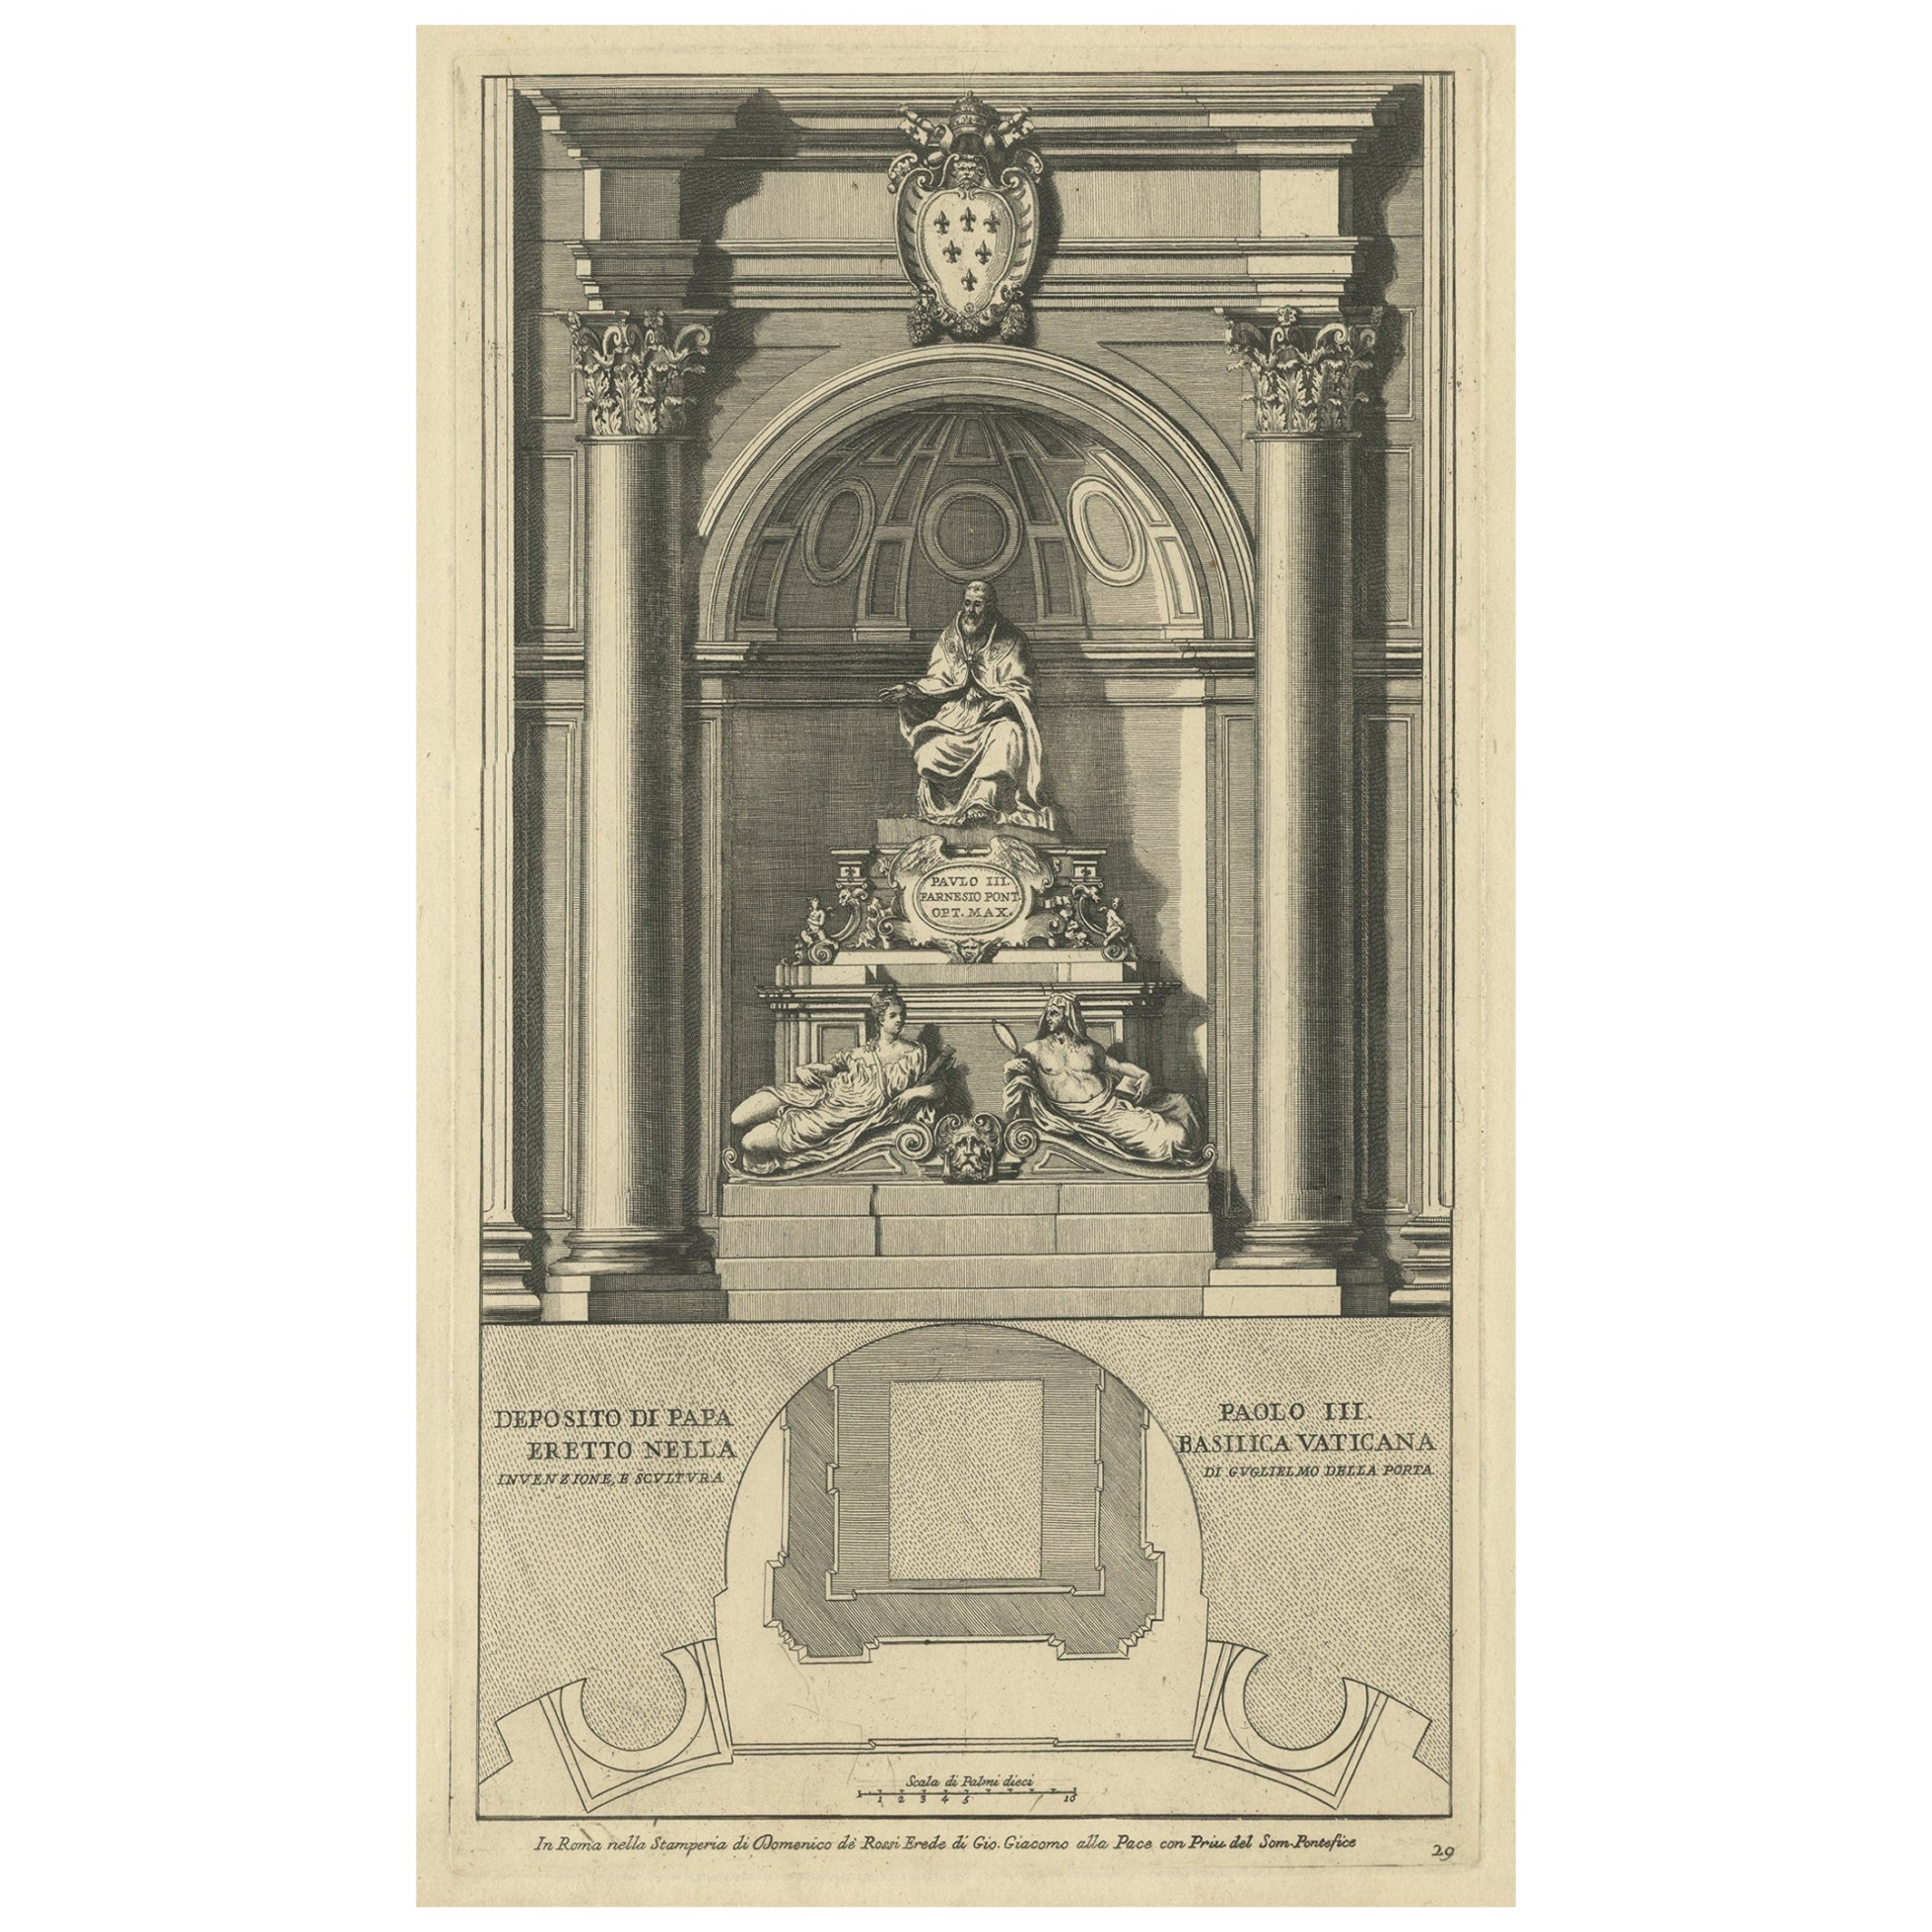 Antique Print of the Monument to Pope Paul iii Located in the Vatican, c.1710